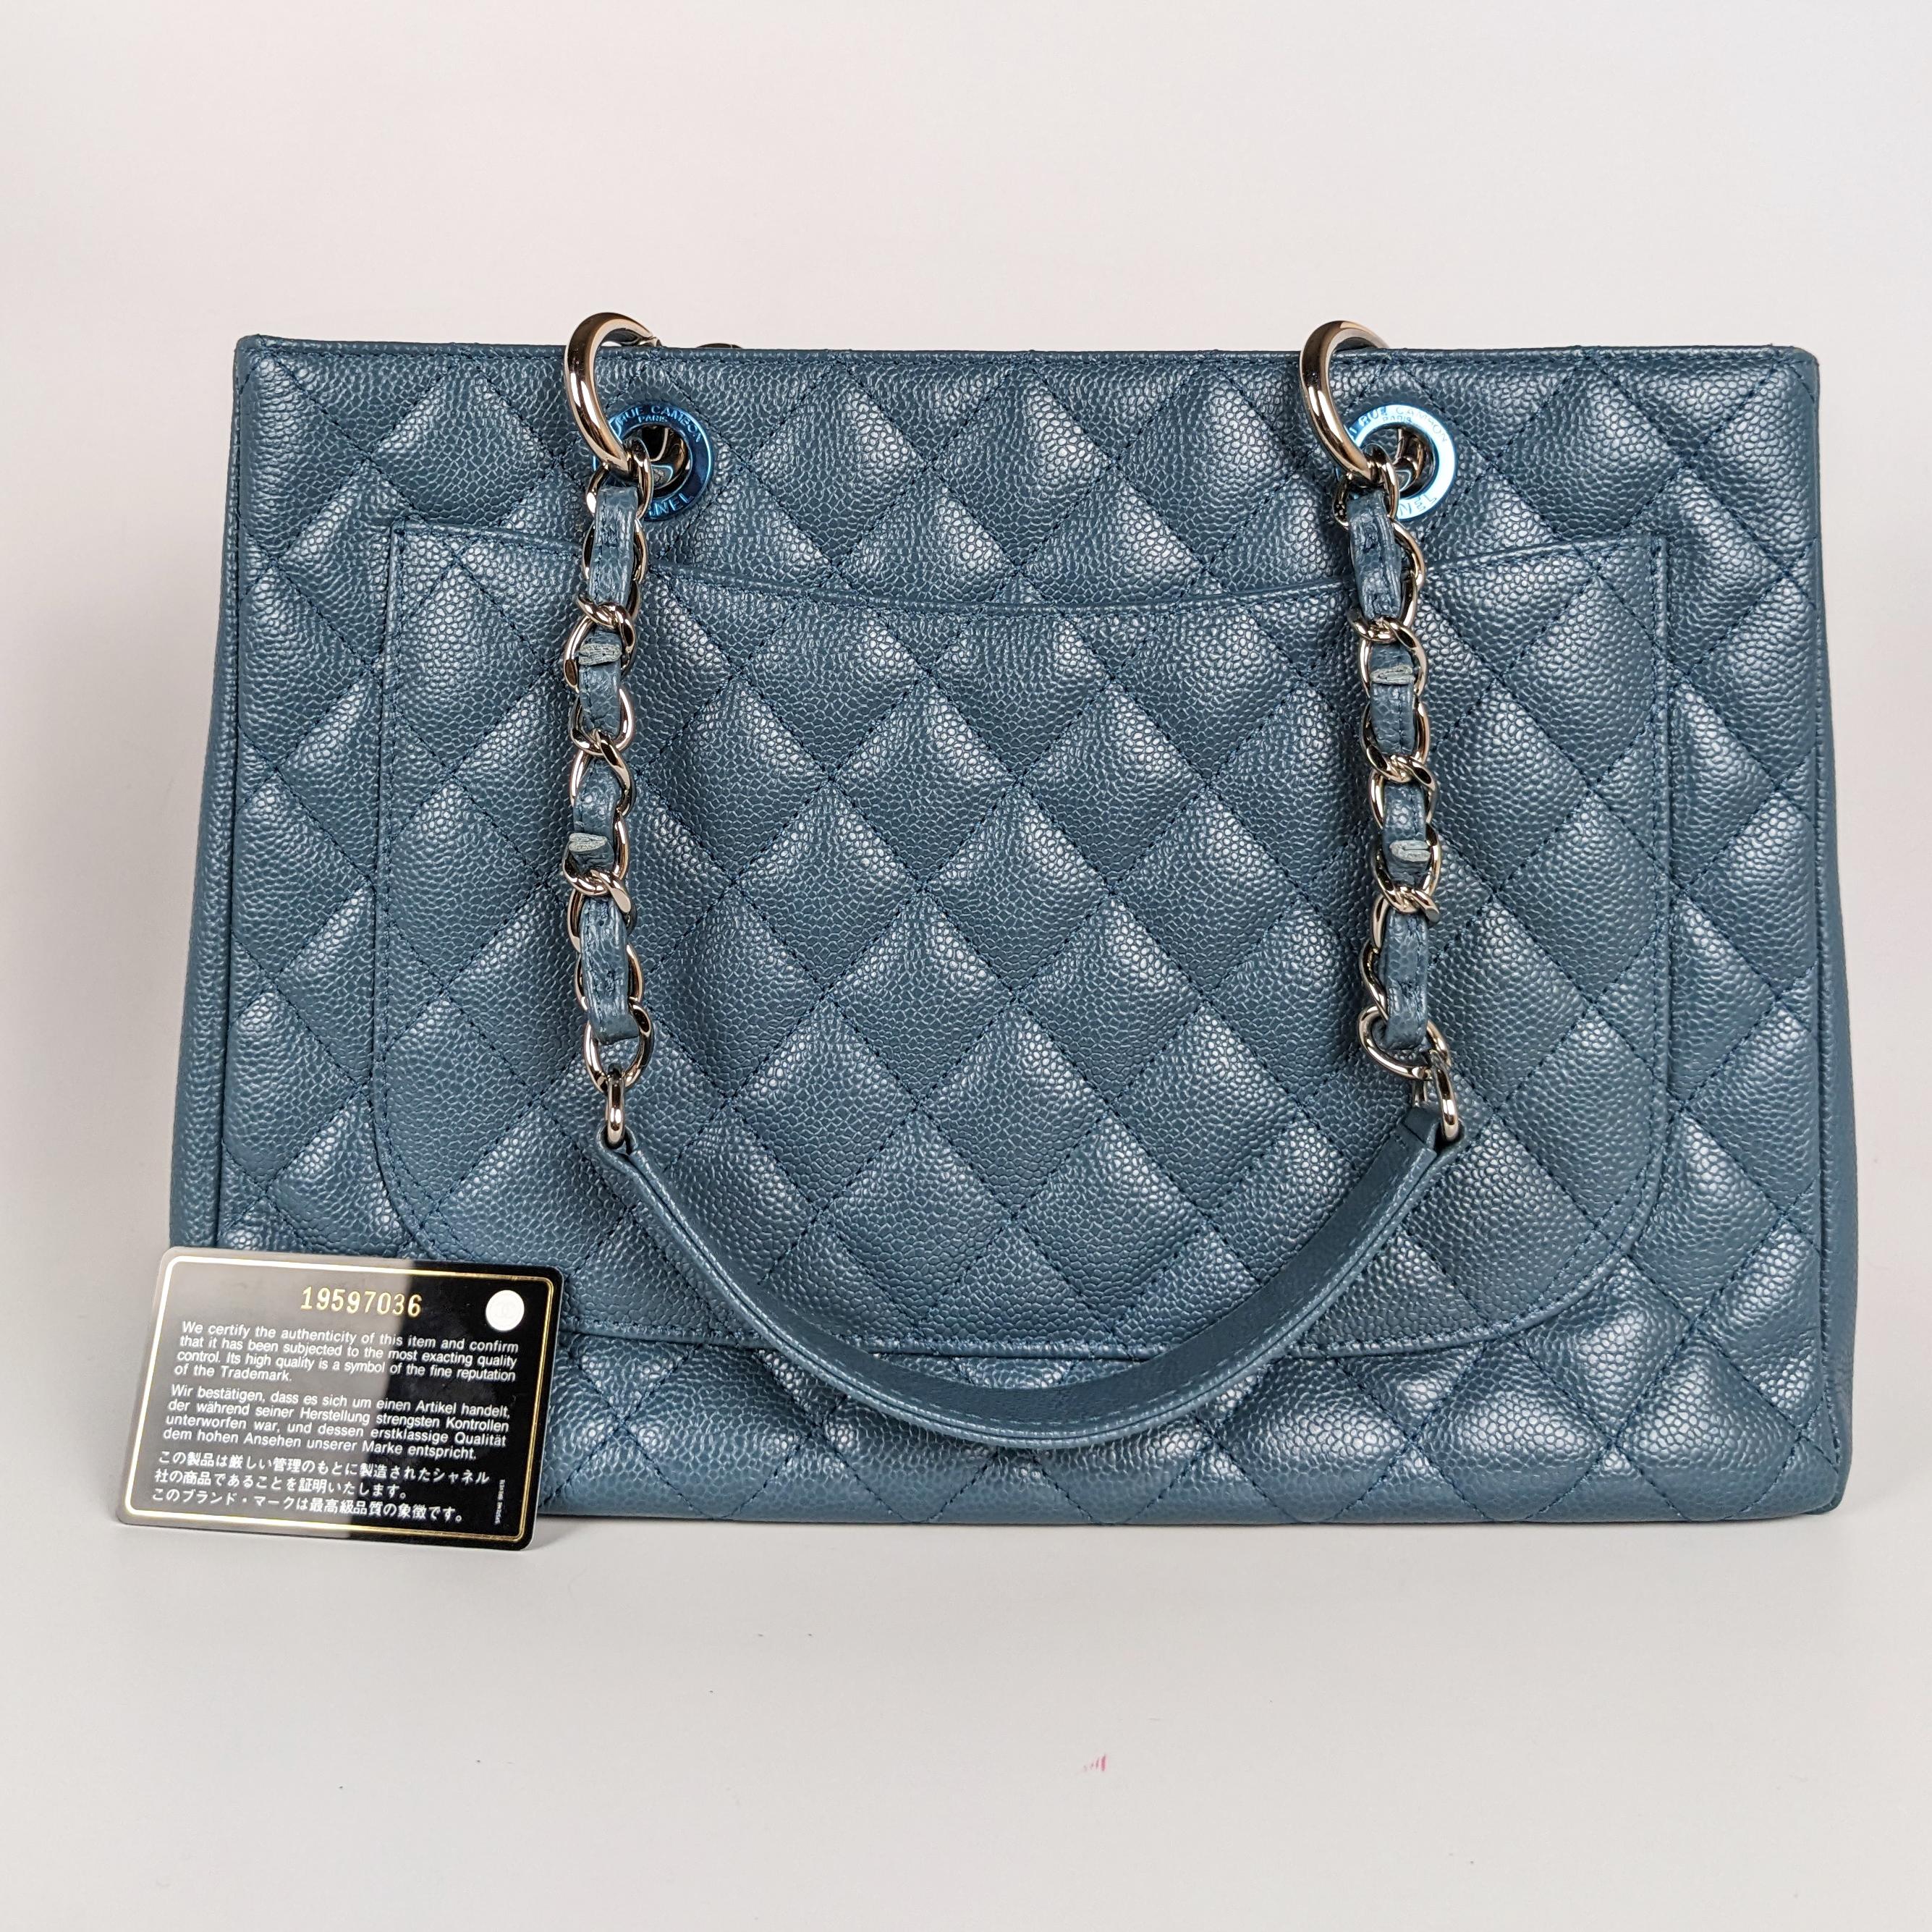 Chanel Caviar Leather Grand Shopping Tote GST Blue

Condition: This authentic Chanel tote is in excellent pre-loved condition. There is faint corner wear and light interior marks.

Includes: Authenticity card

Features: Silver-tone hardware,